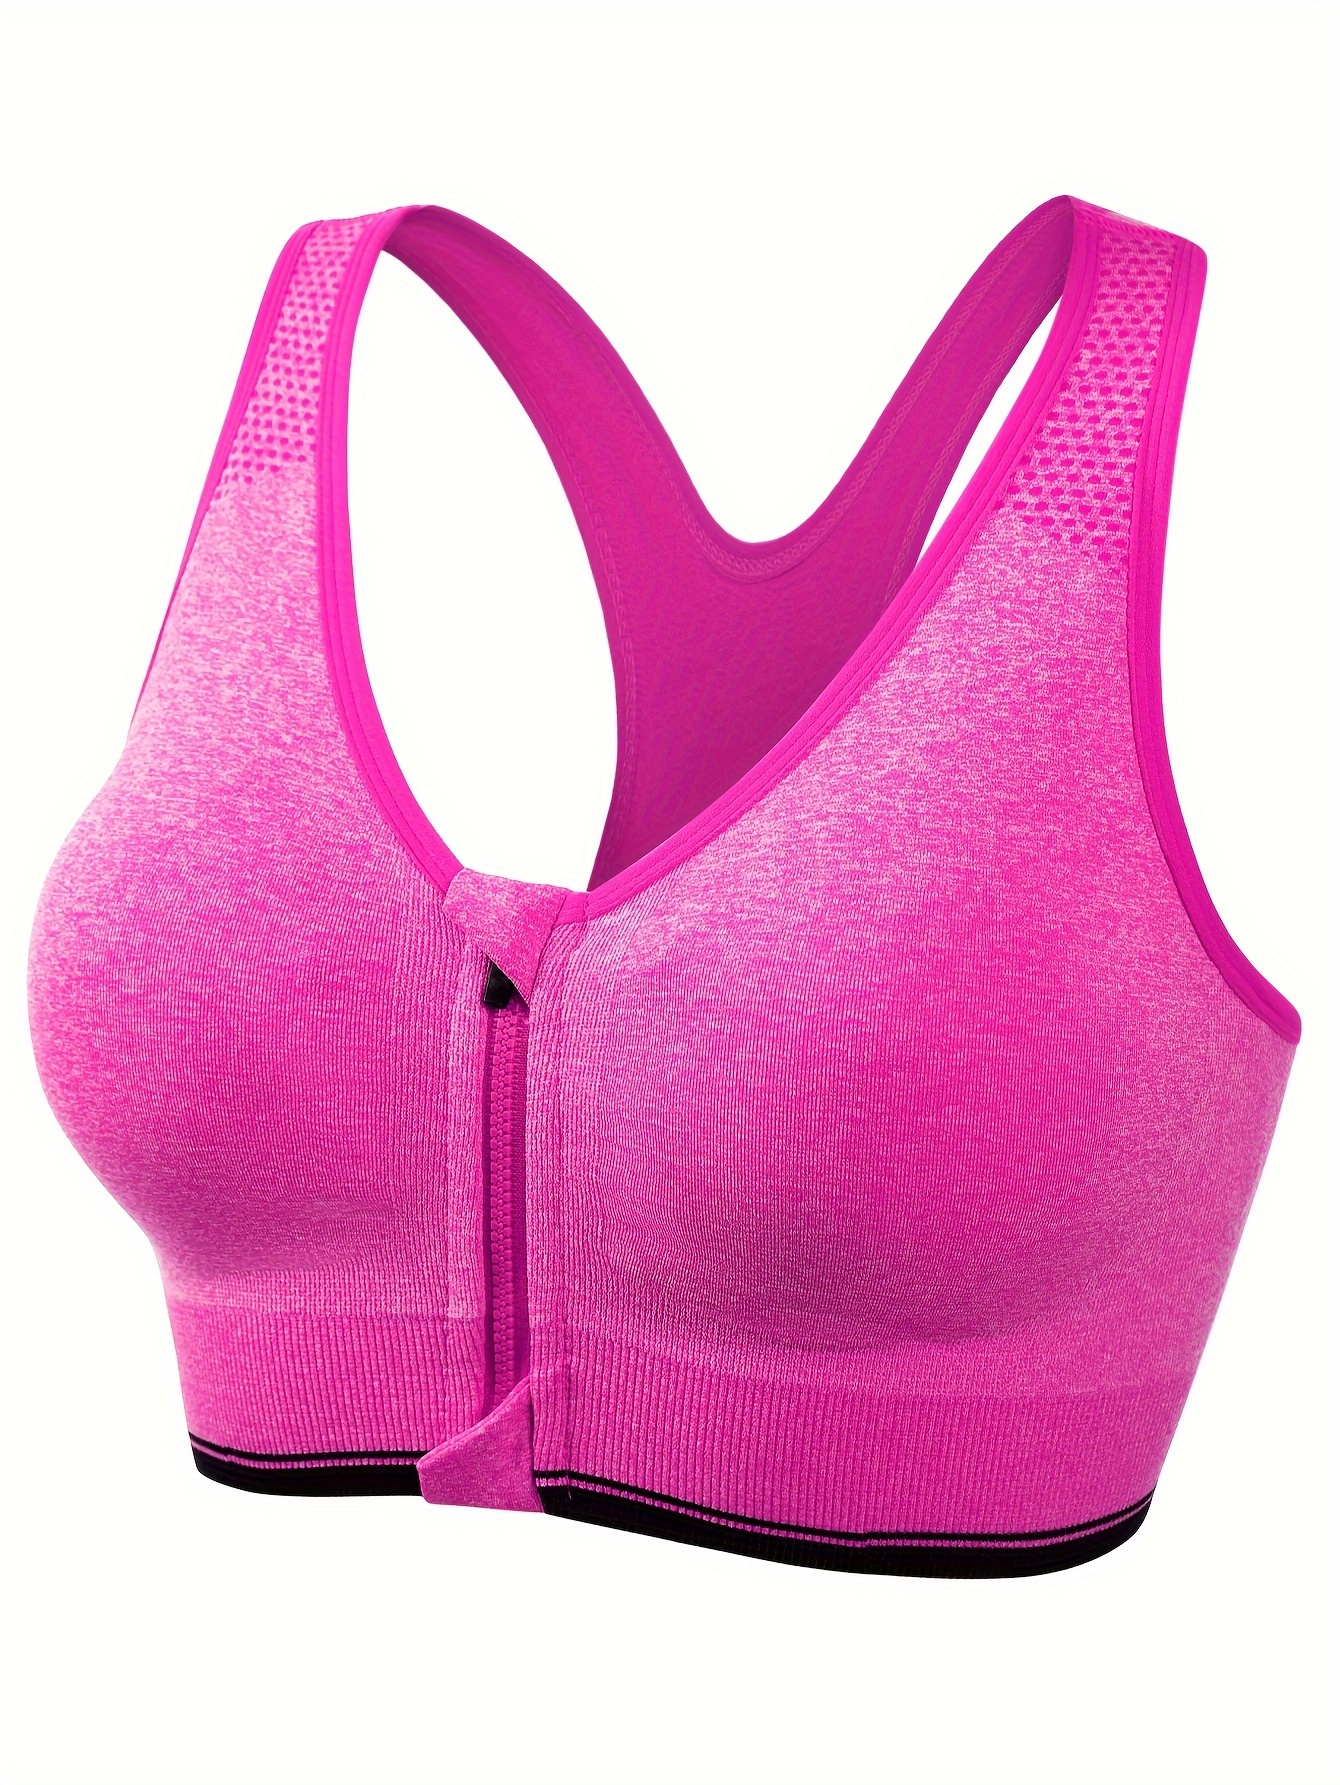 3Pcs Women's Sports Bras Intimates with Pads Plus Size Bras for